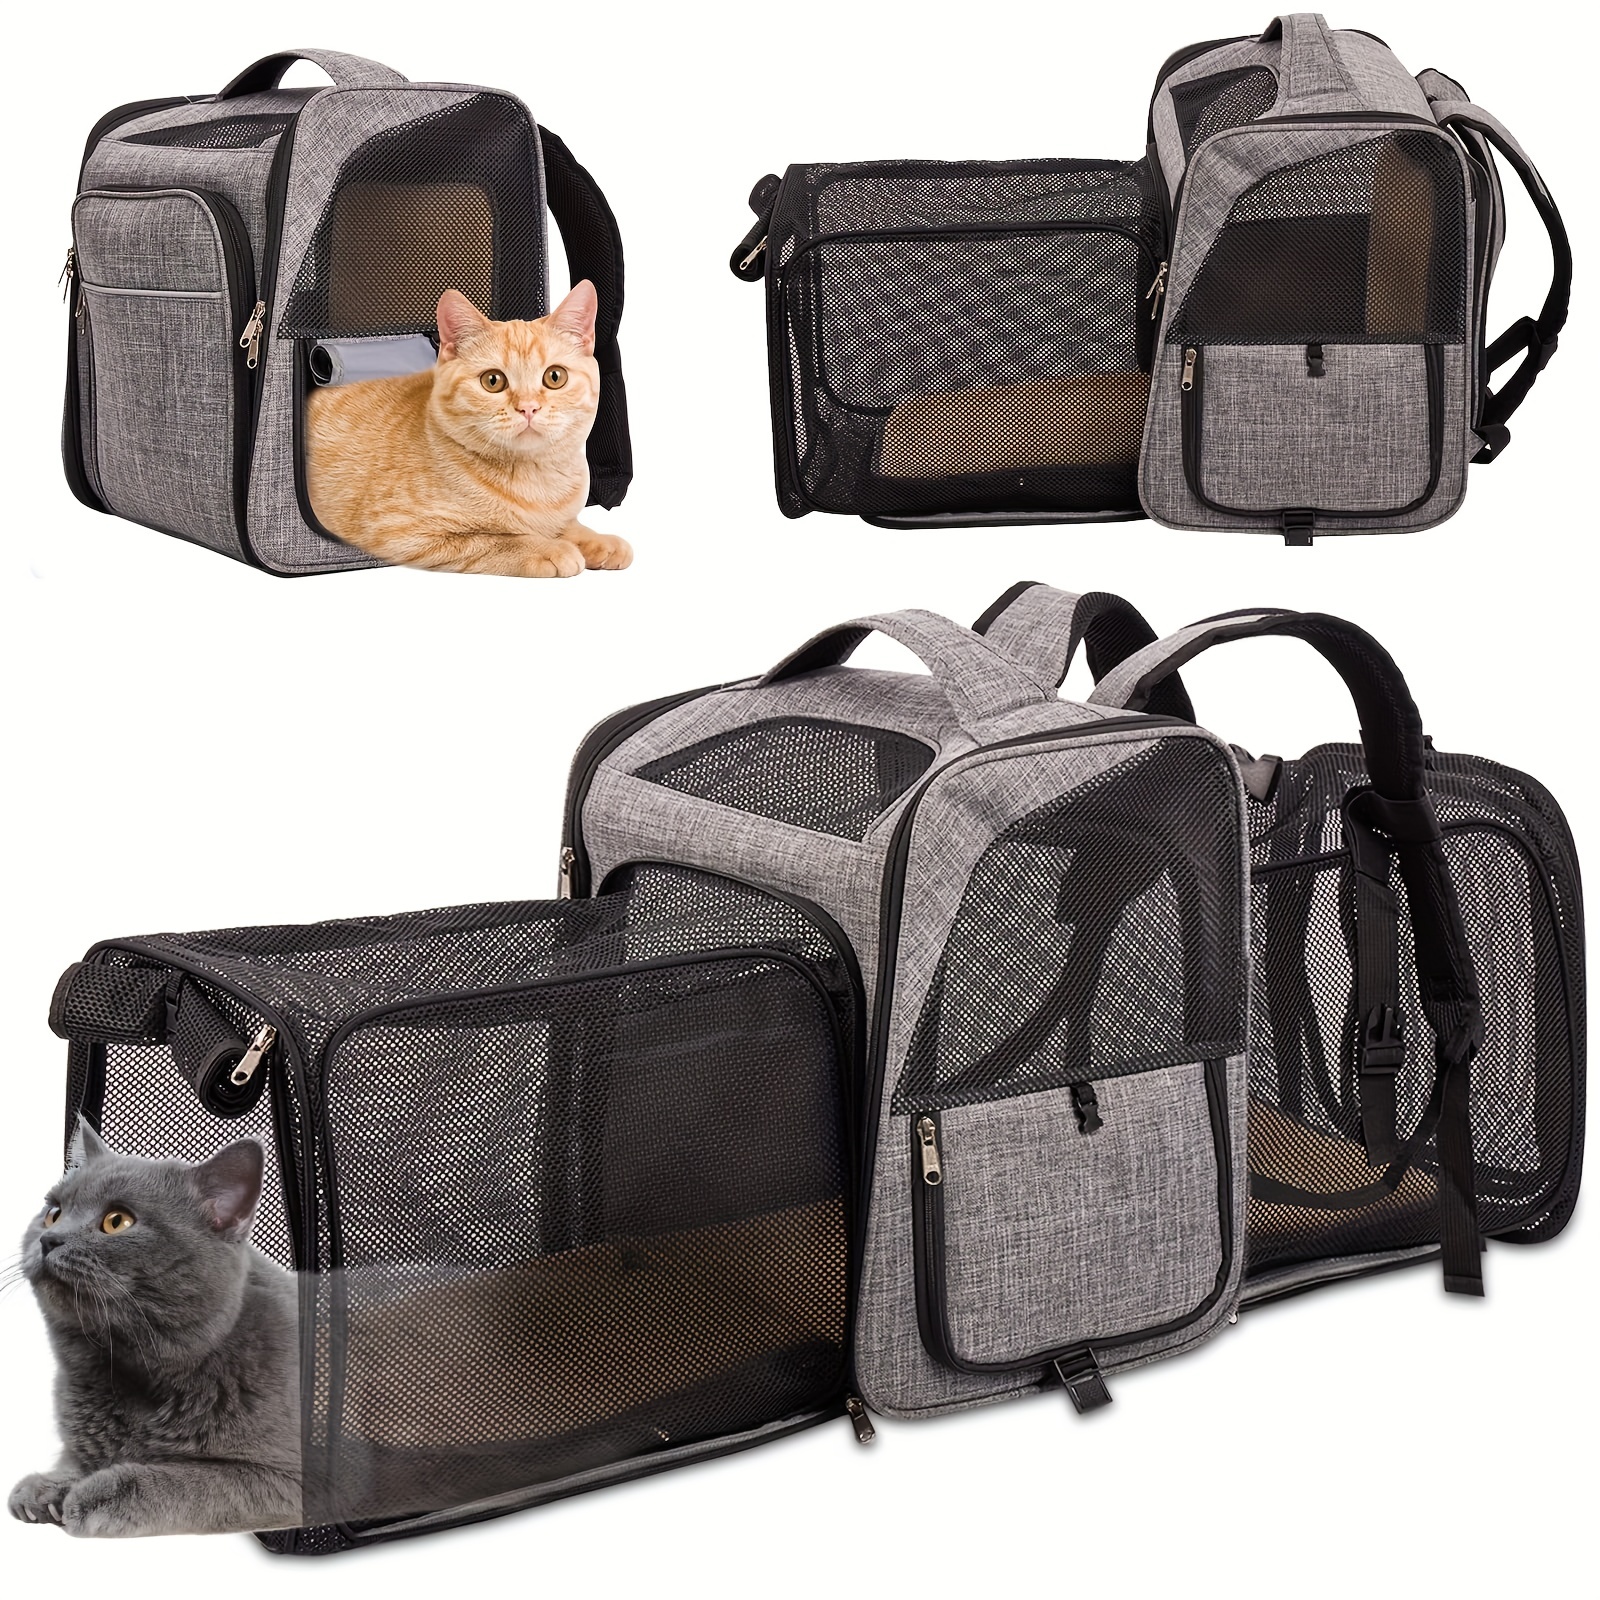 $17/mo - Finance HOVONO Double-Compartment Pet Carrier Backpack with Wheels  for Small Cats and Dogs, Cat Rolling Carrier for 2 Cats, Perfect for  Traveling/Taking a Walk/Trips to The Vet, Blue